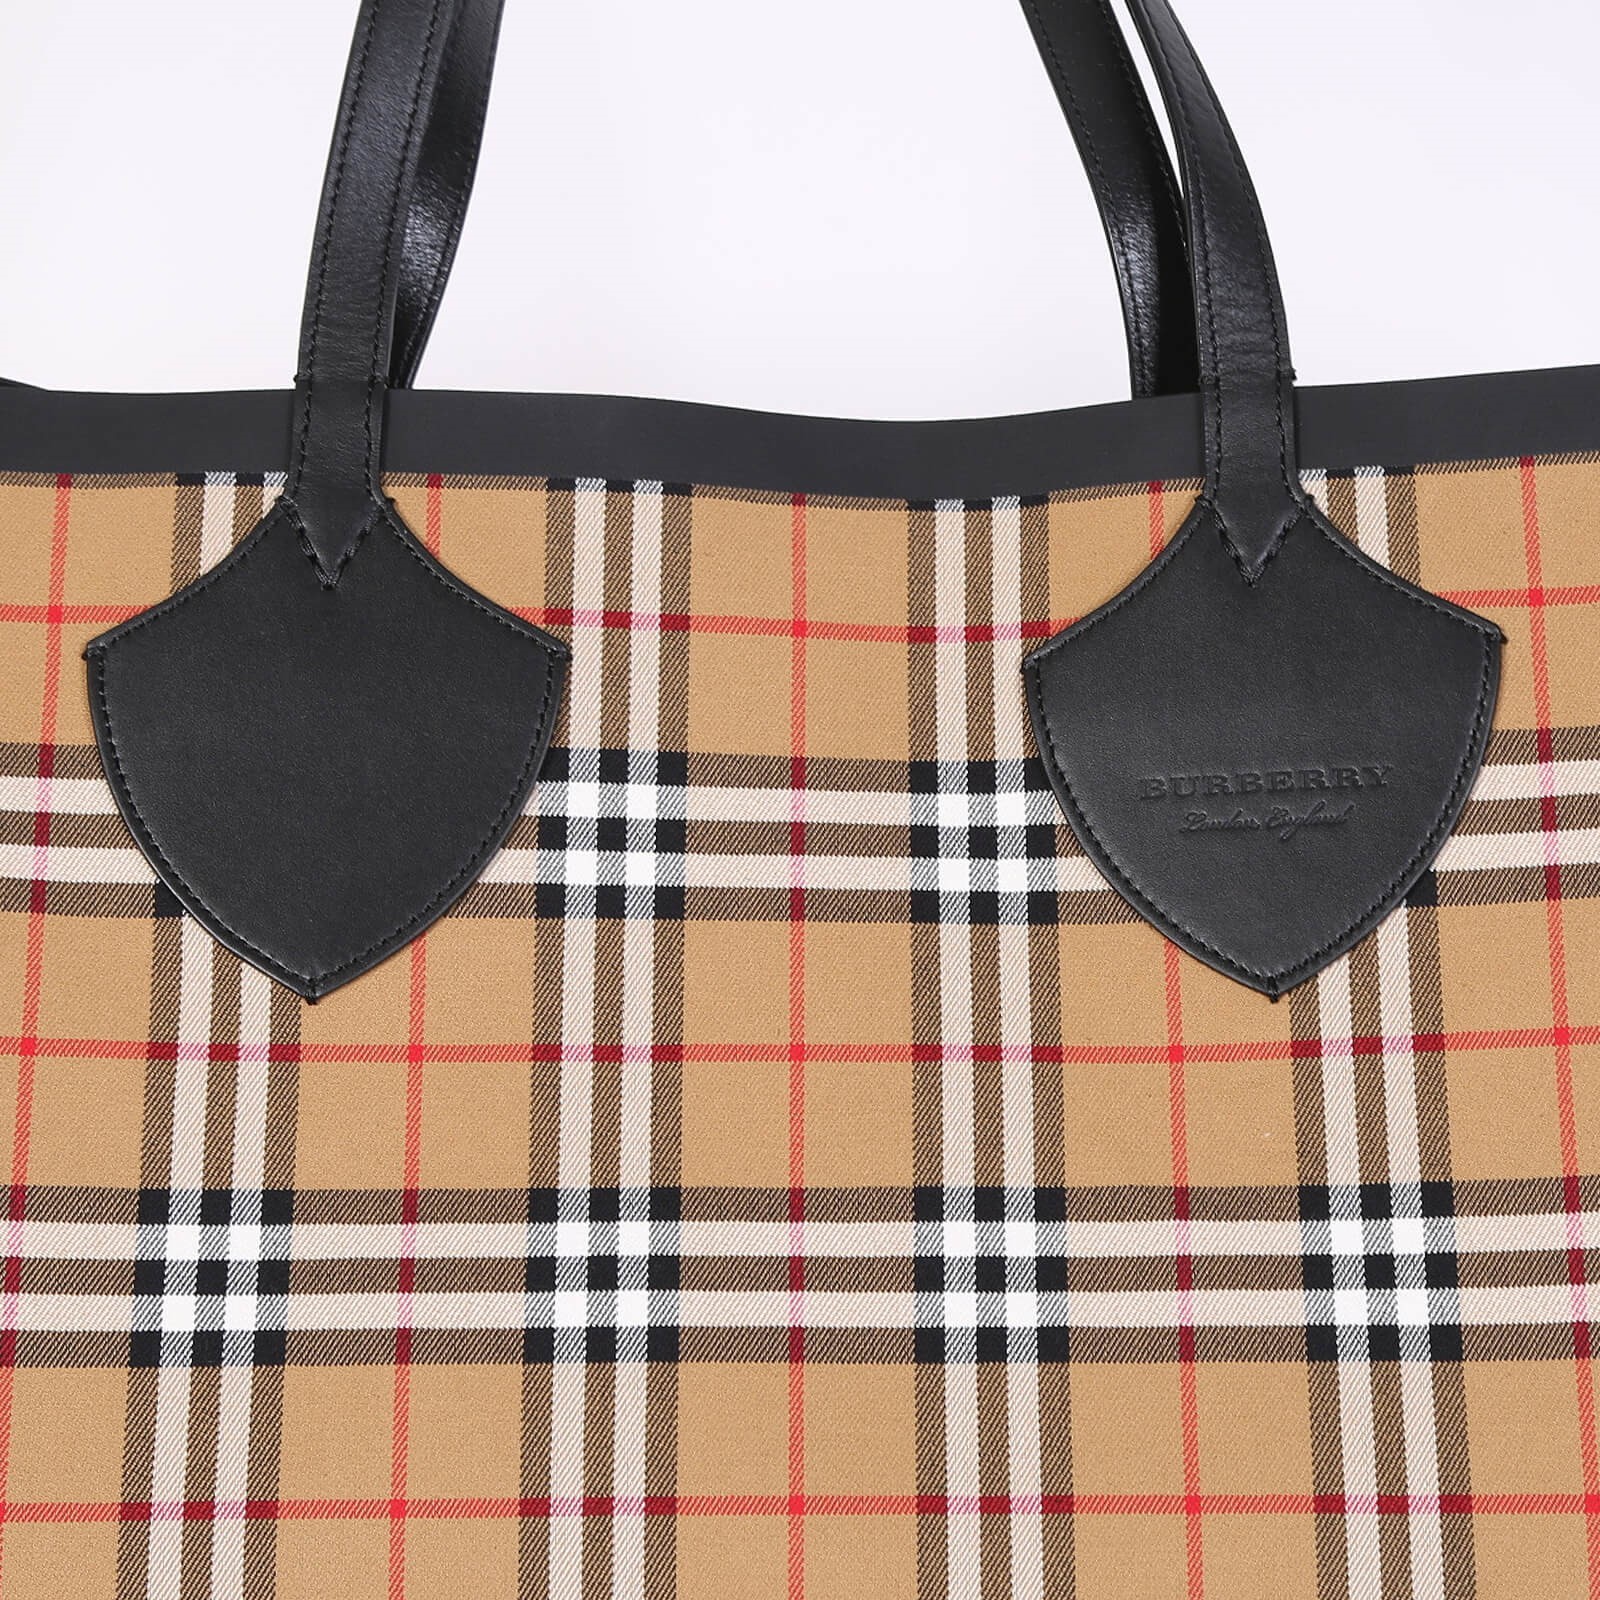 Burberry The Giant Reversible Tote In Canvas Check And Leather, $1,801, farfetch.com